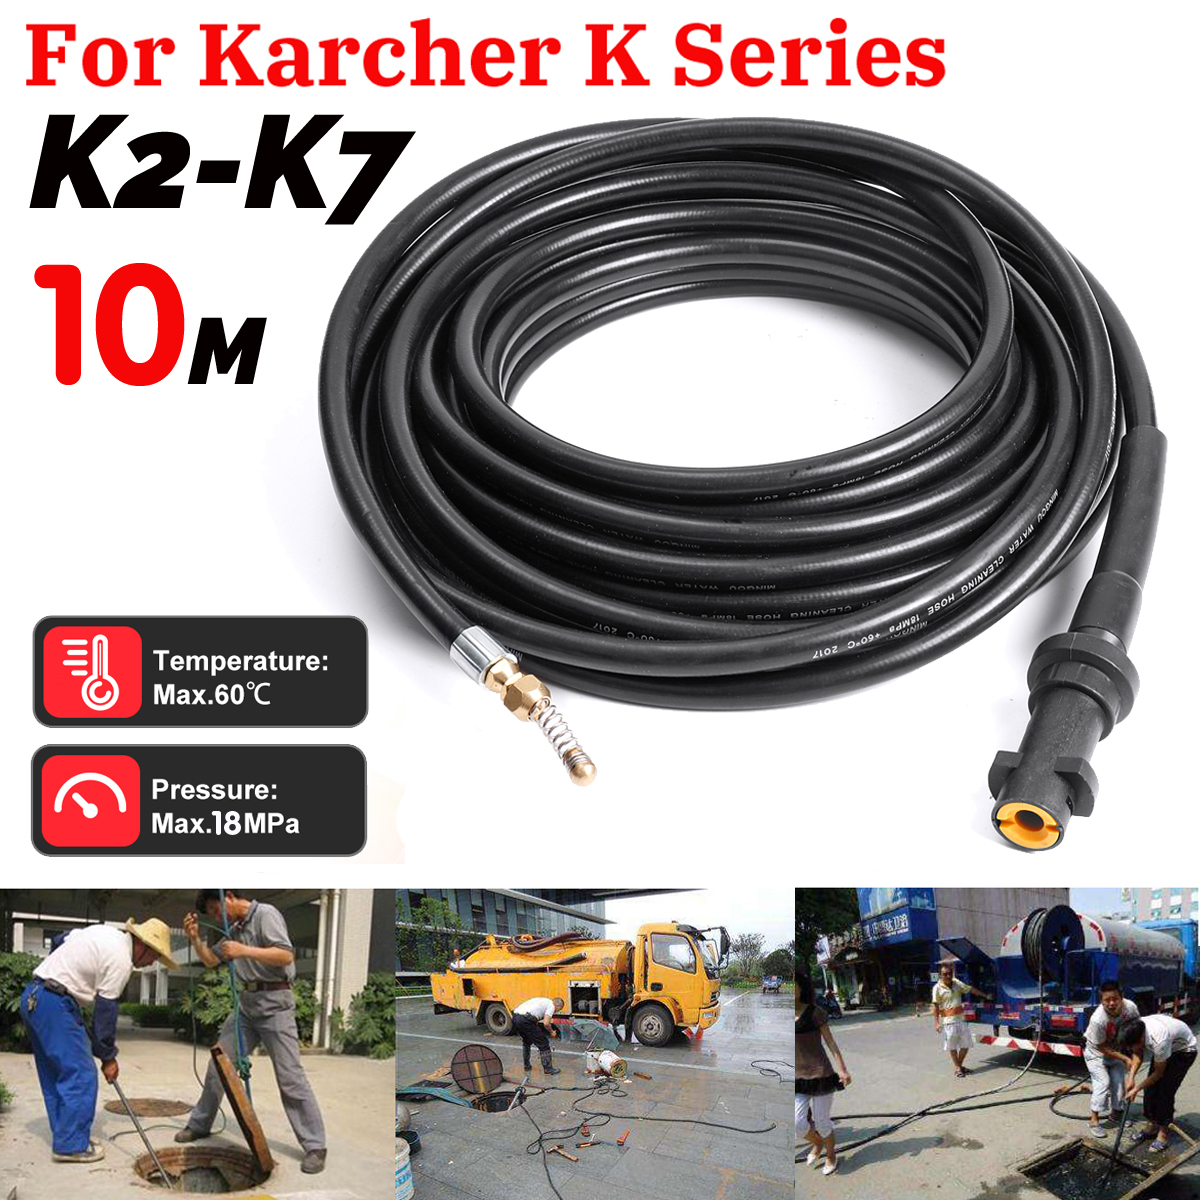 10M-18MPa-Drain-Sewer-Pipe-Cleaning-Hose-Jet-Nozzle-For-Karcher-K2-K7-Pressure-Washer-1463082-1